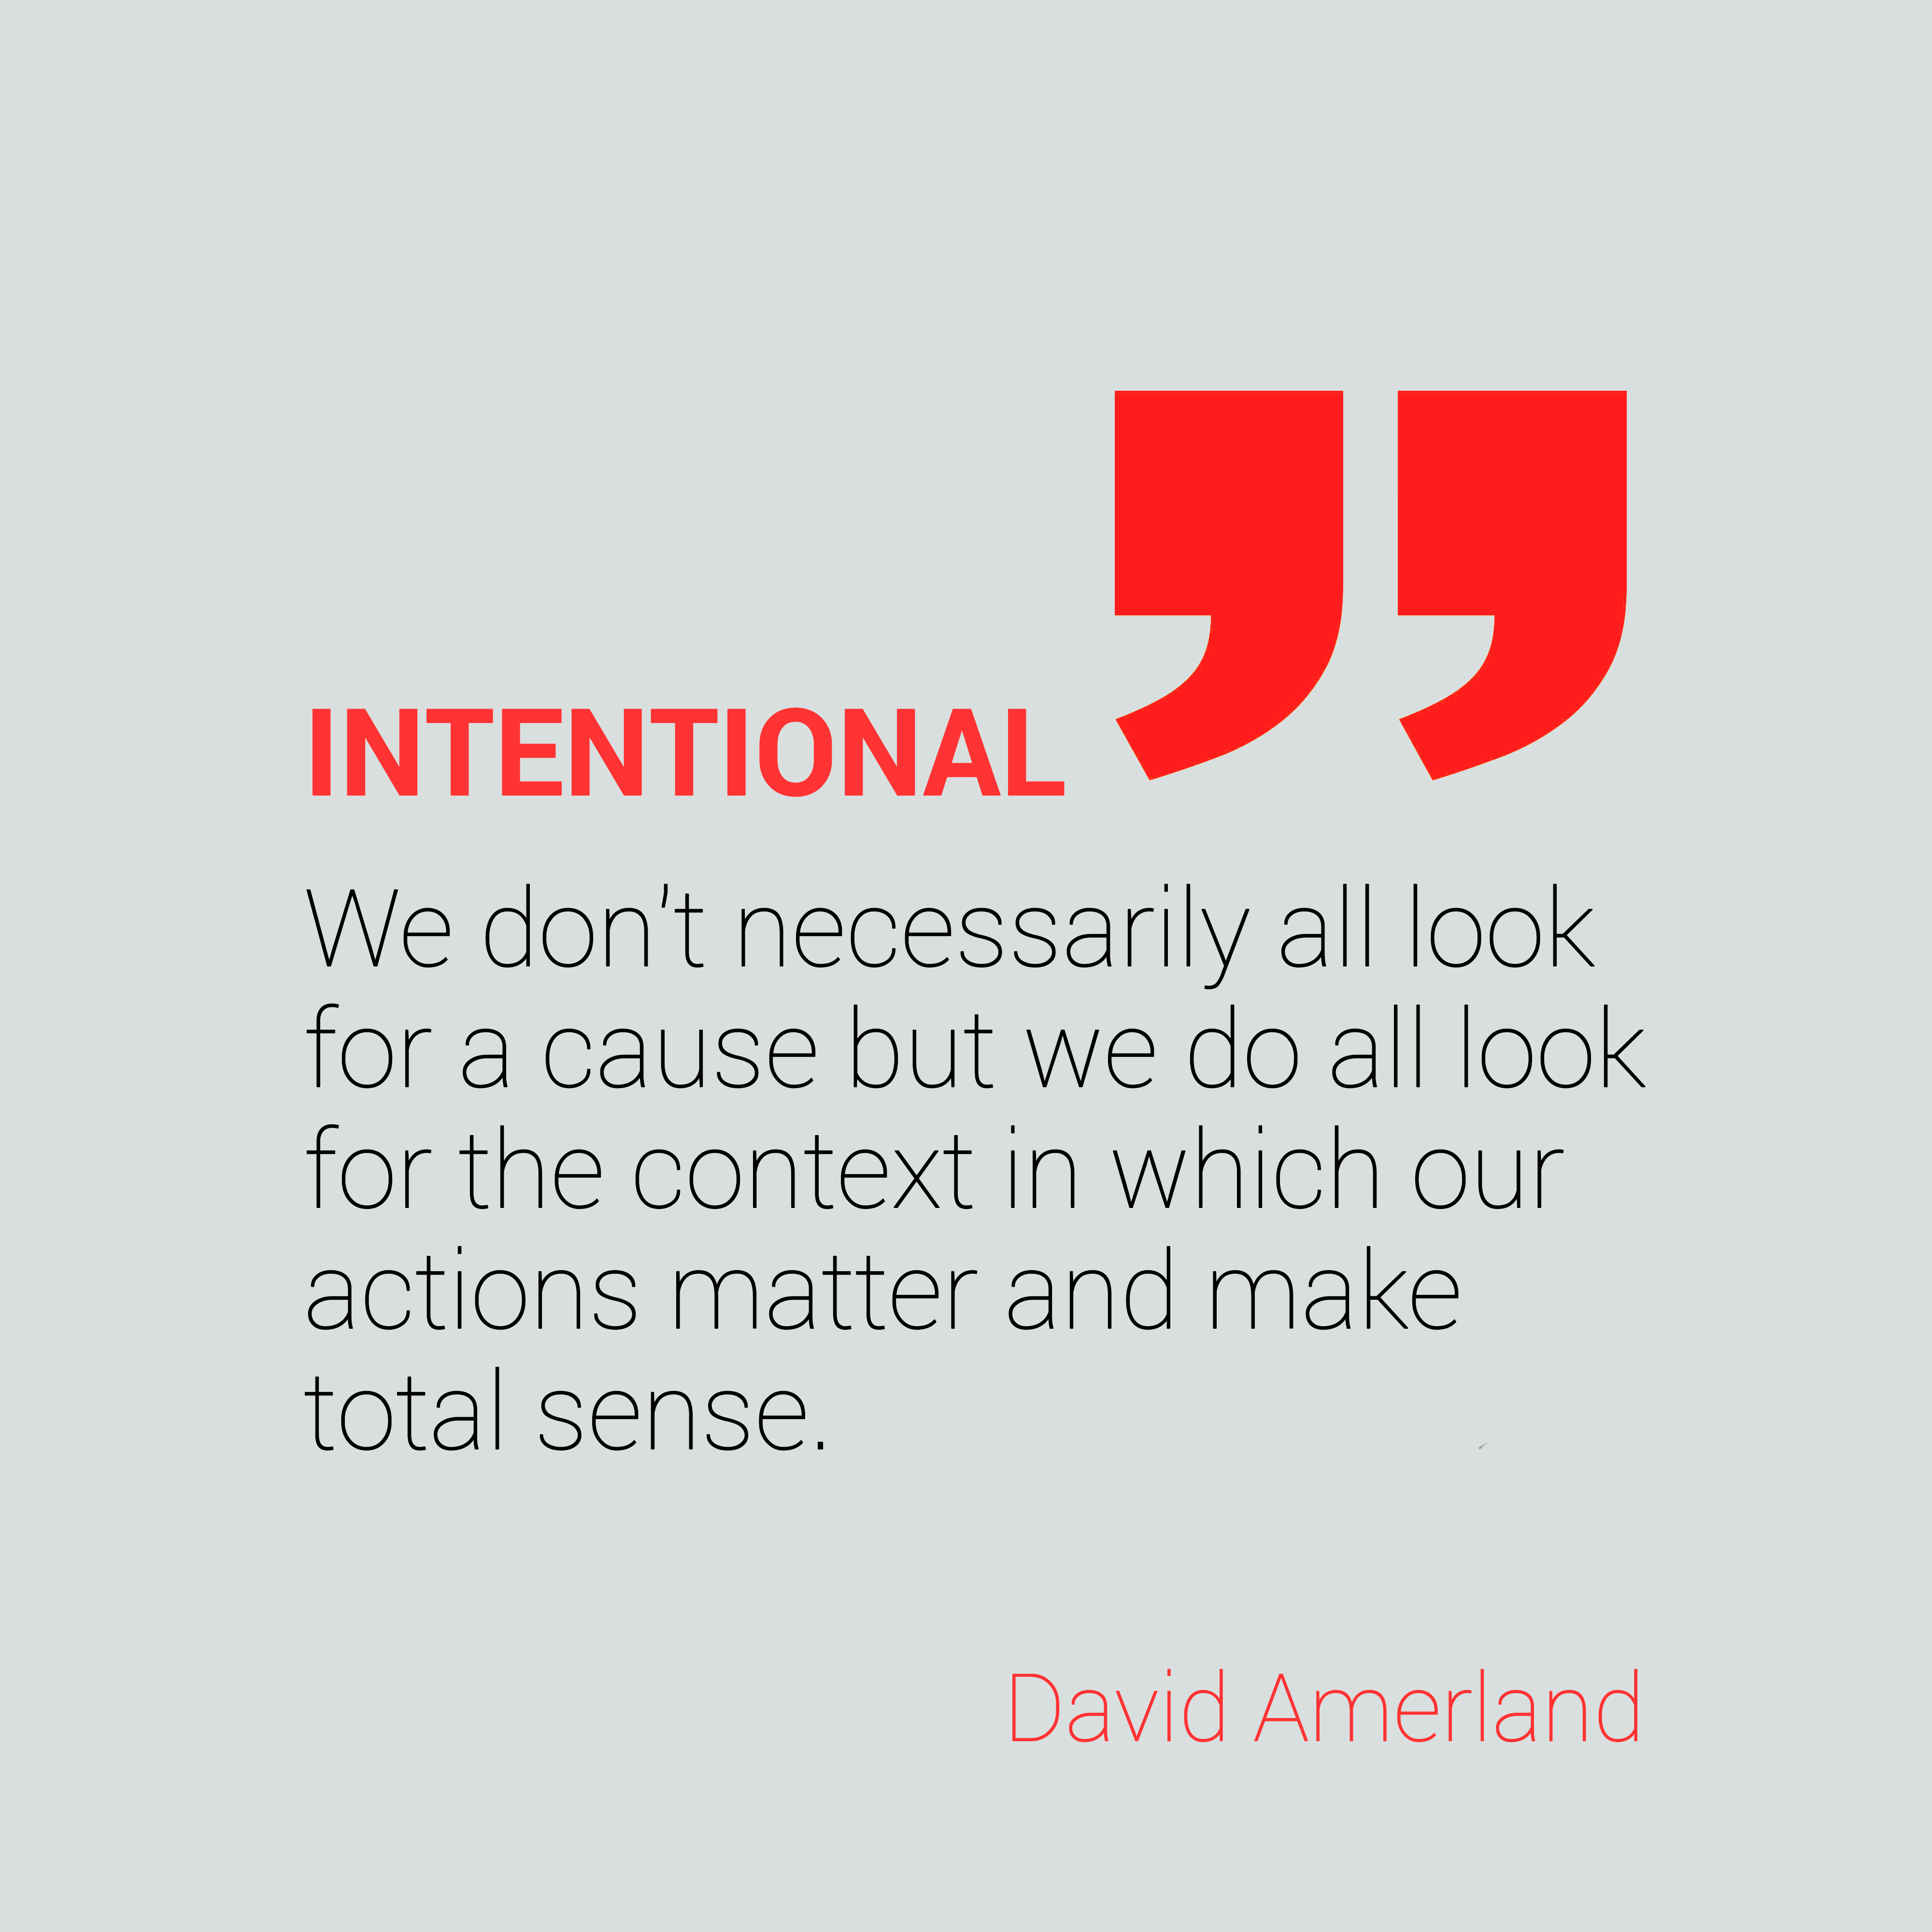 INTENTIONAL 5 5

We don't necessarily all look
for a cause but we do all look
for the context in which our
actions matter and make
total sense.

David Amerland